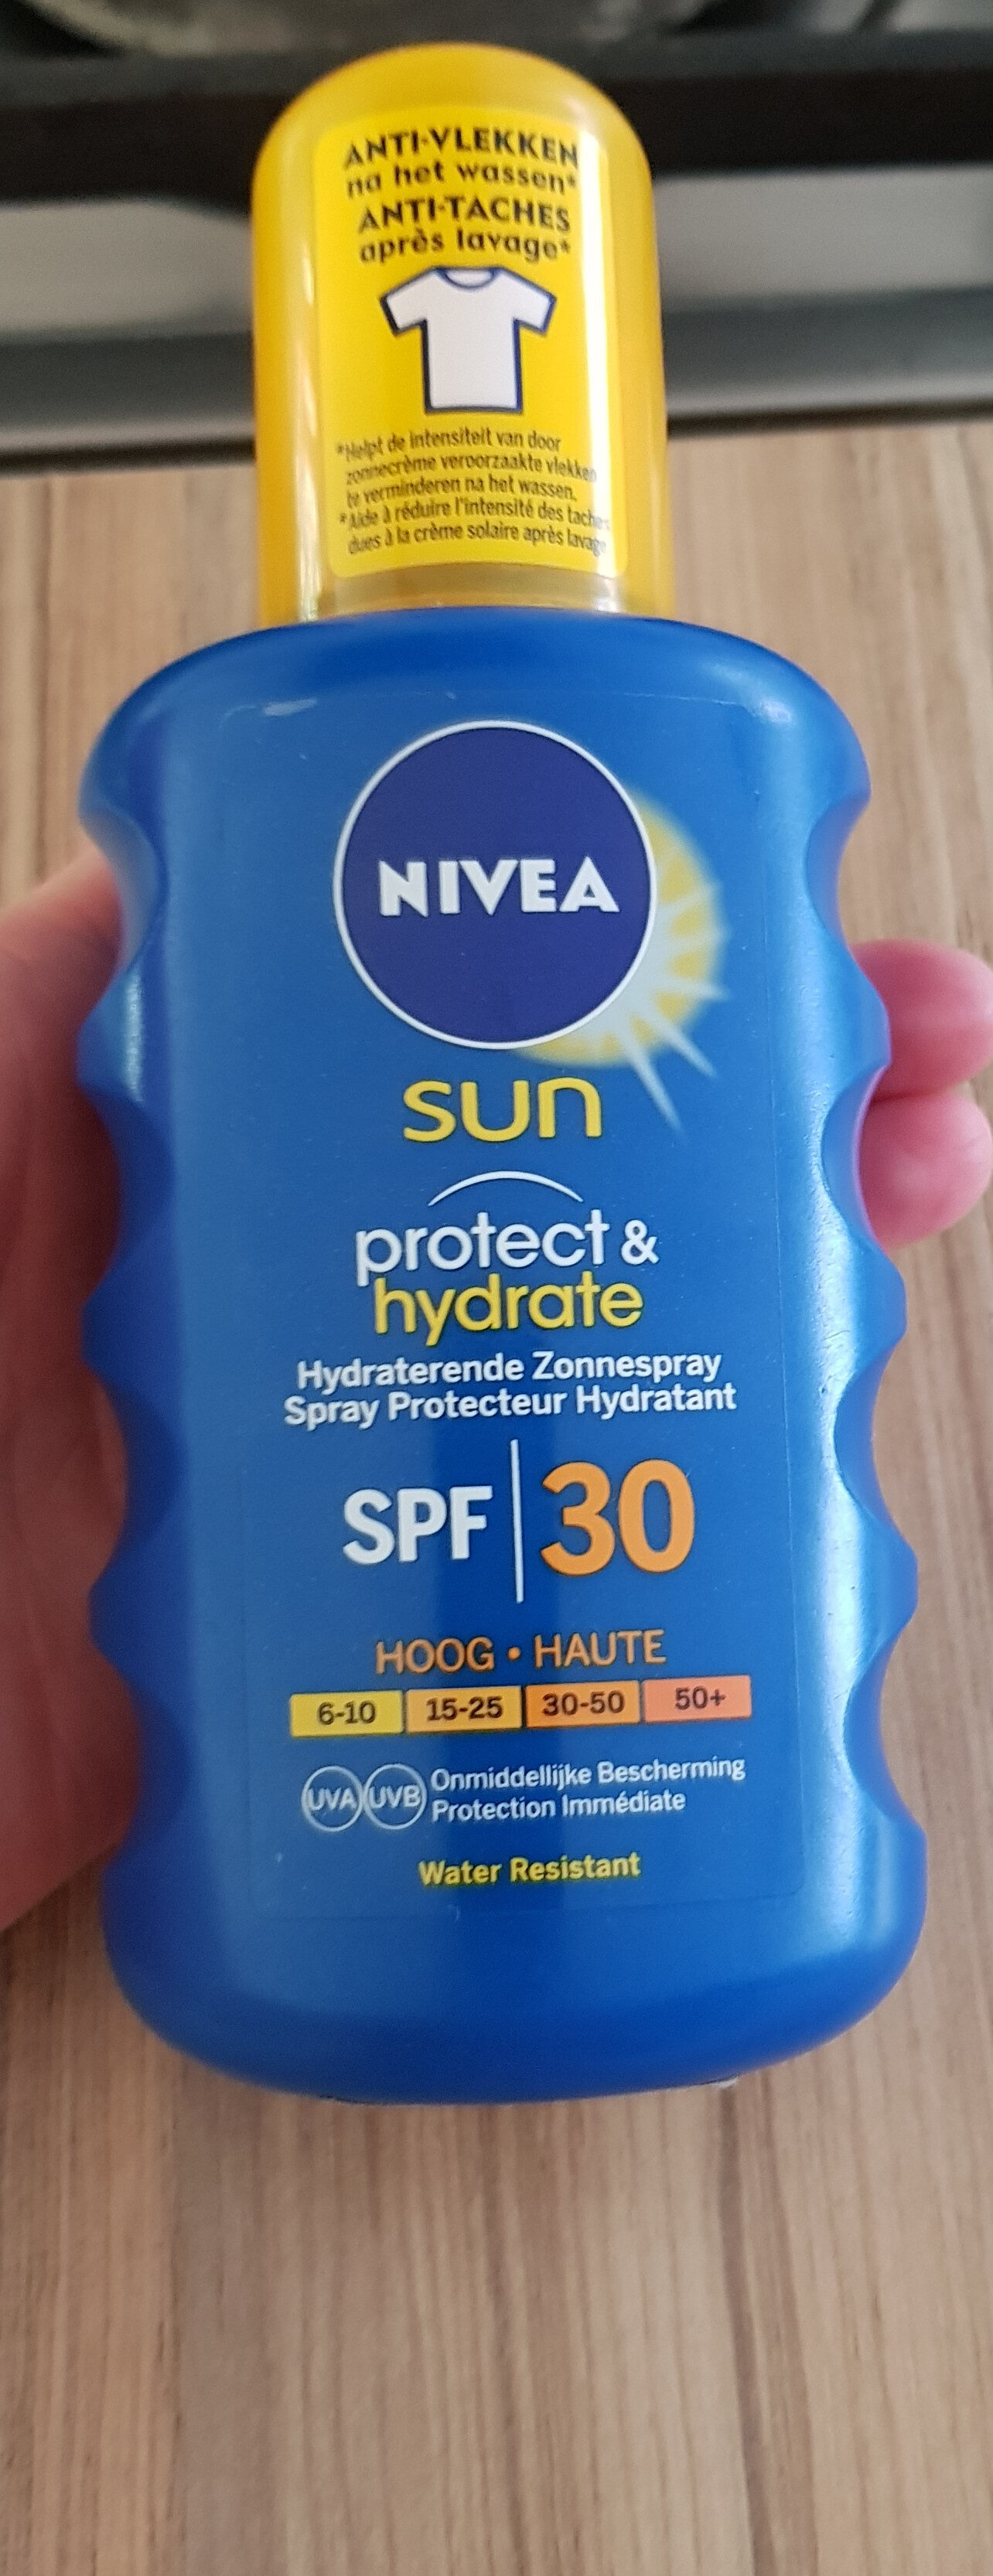 Sun Protect & Hydrate 30 - Product - en